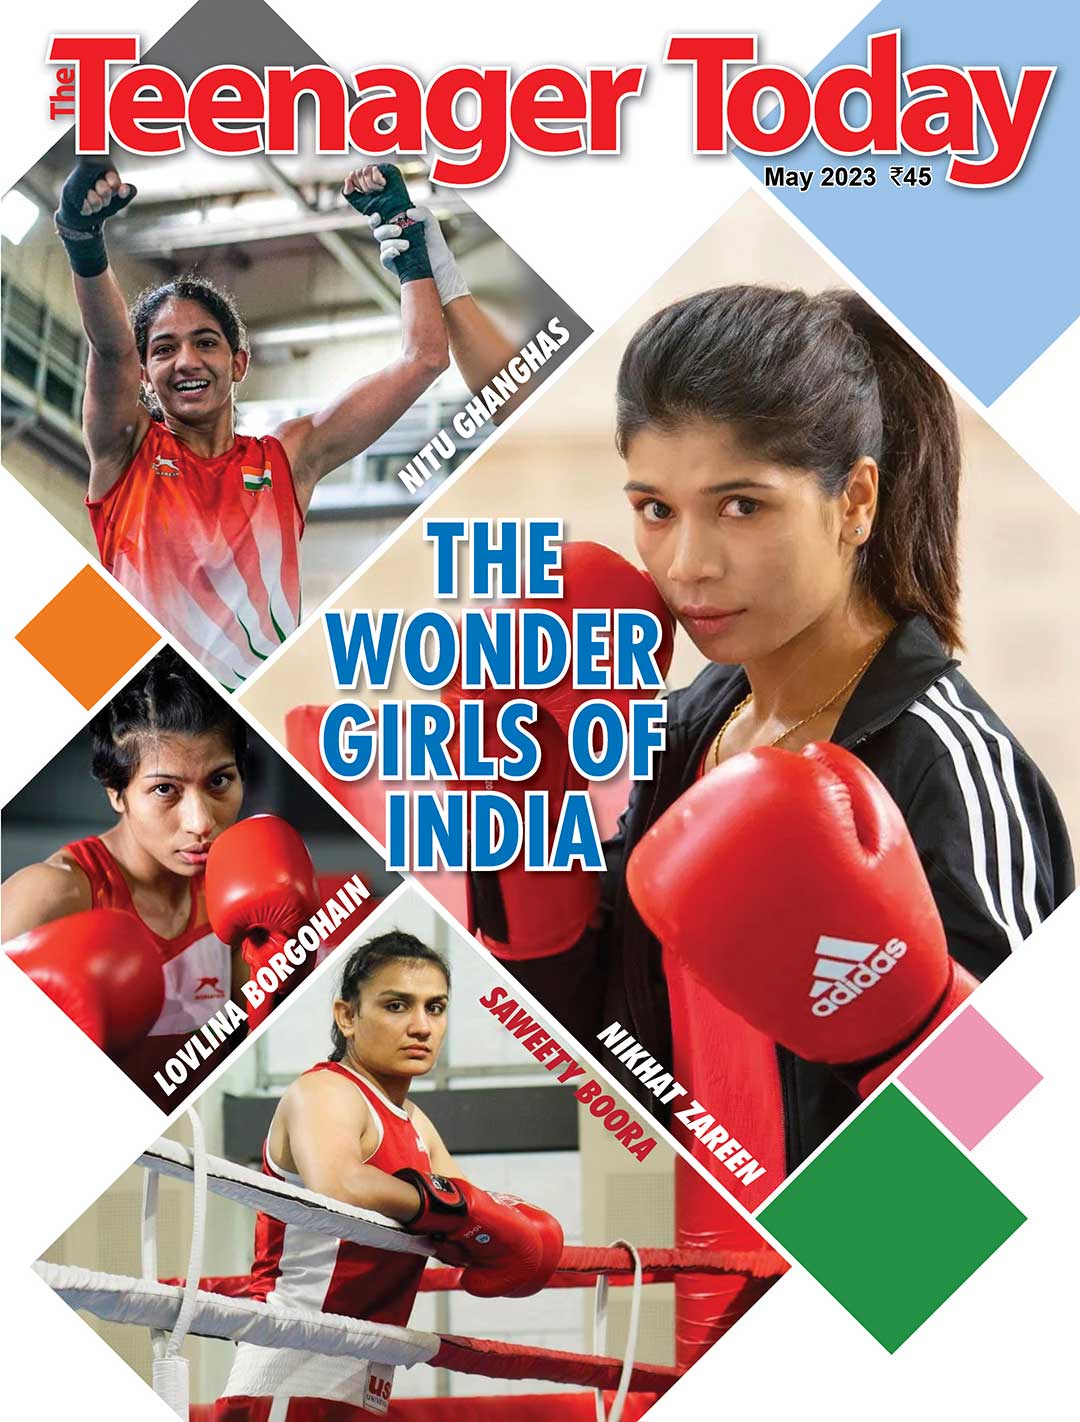 Cover of the May 2023 issue of The Teenager Today featuring Nikhat Zareen, Saweety Boora, Lovlina Borgohain and Nitu Ghanghas.